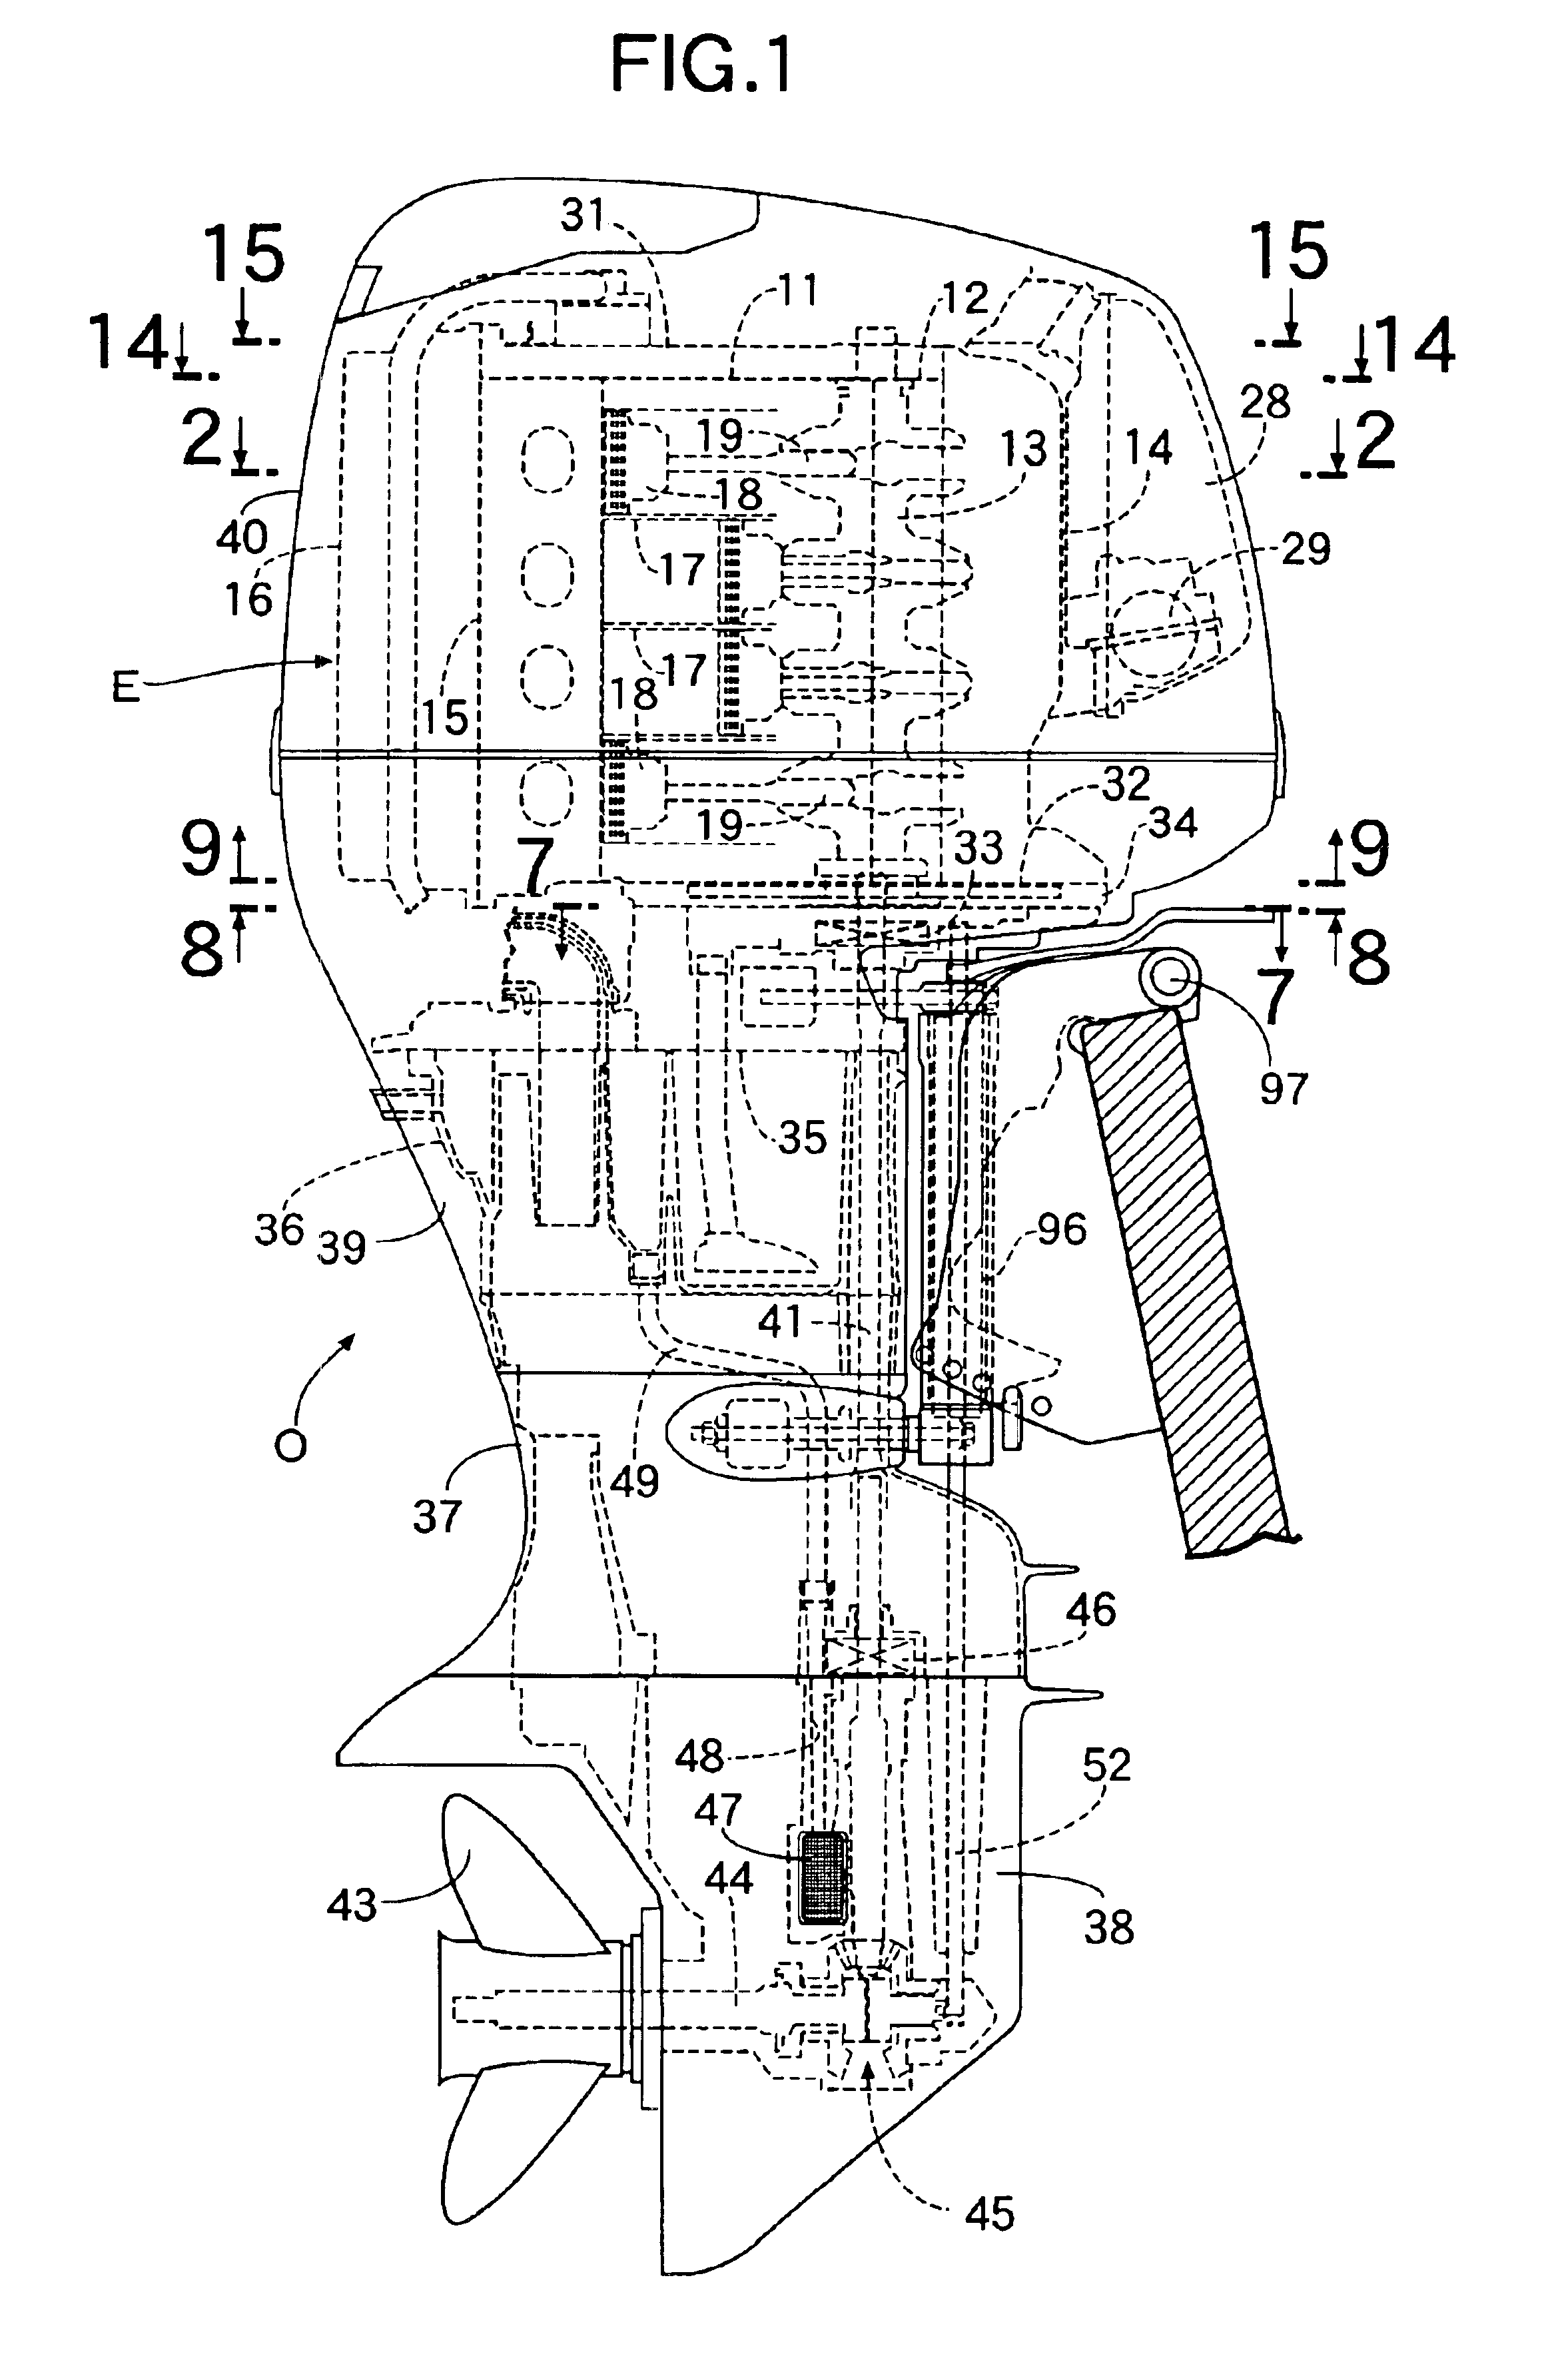 Outboard motor equipped with water-cooled engine